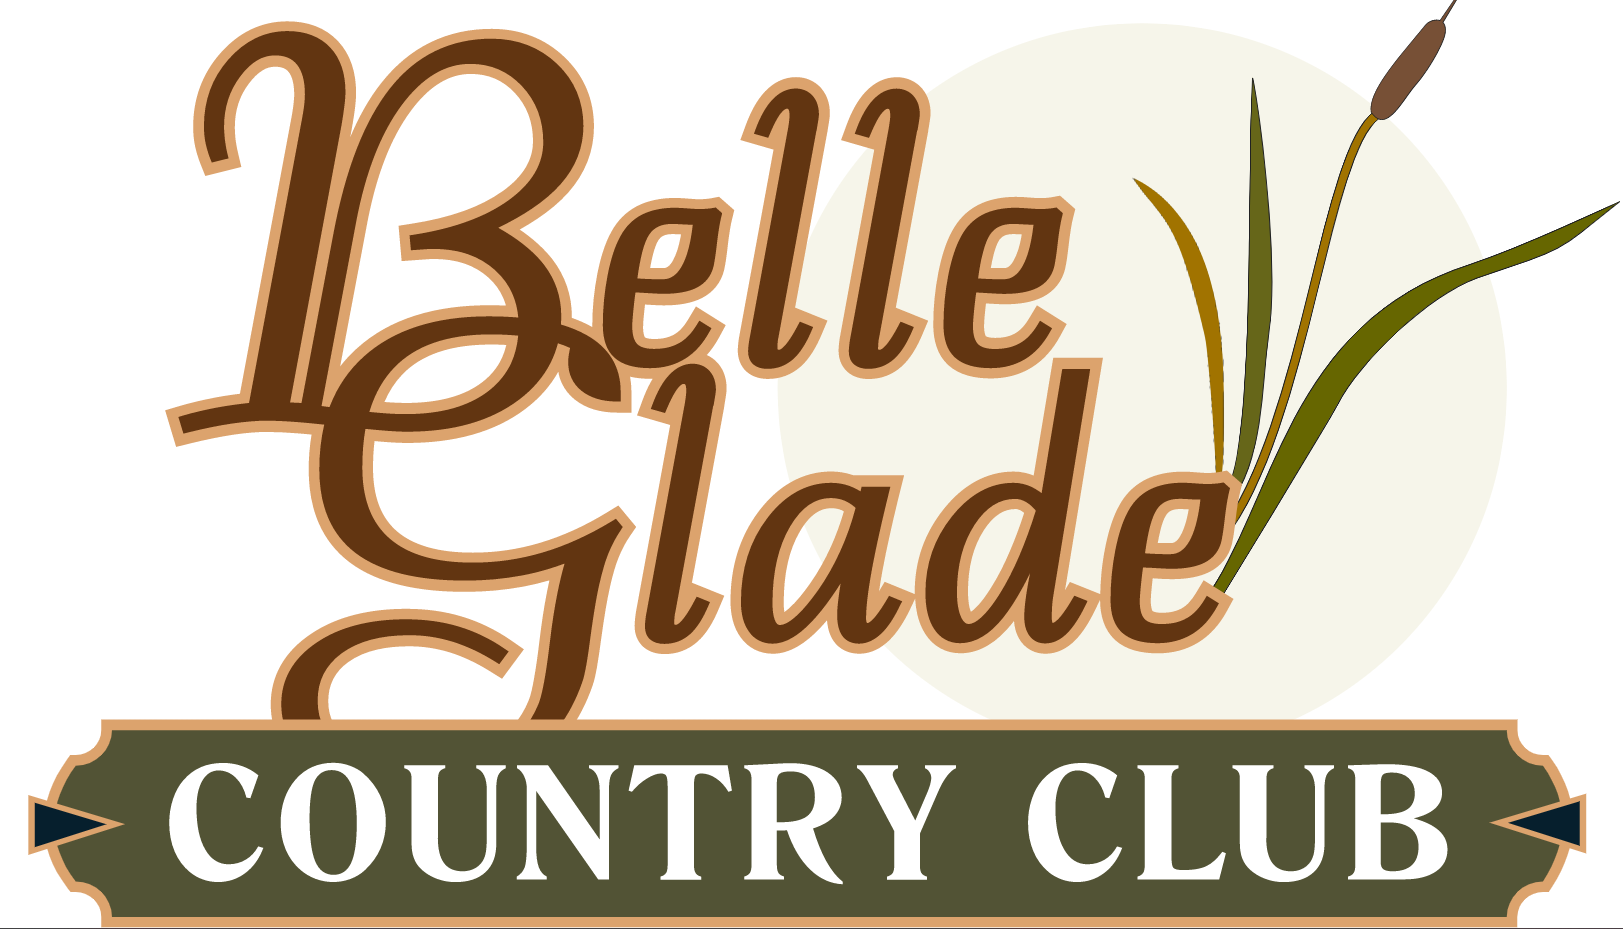 Belle Glade Country Club Company Logo